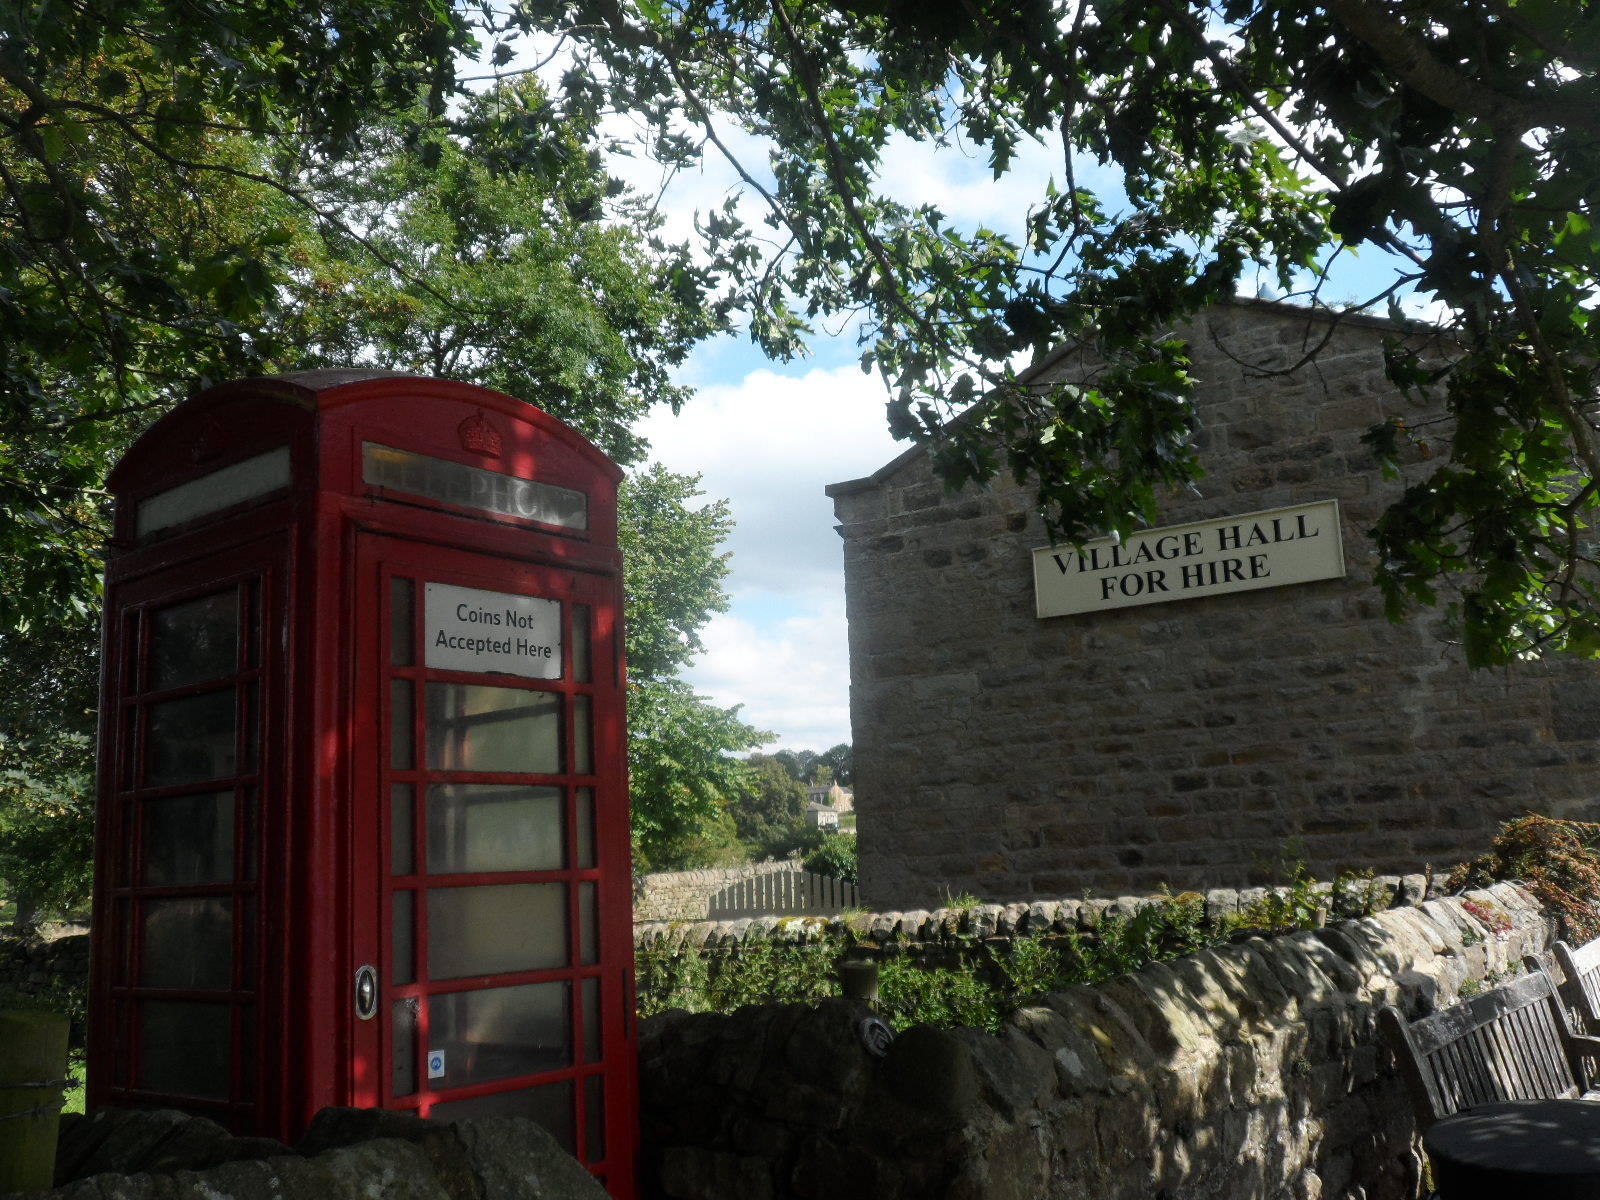 The old phone box